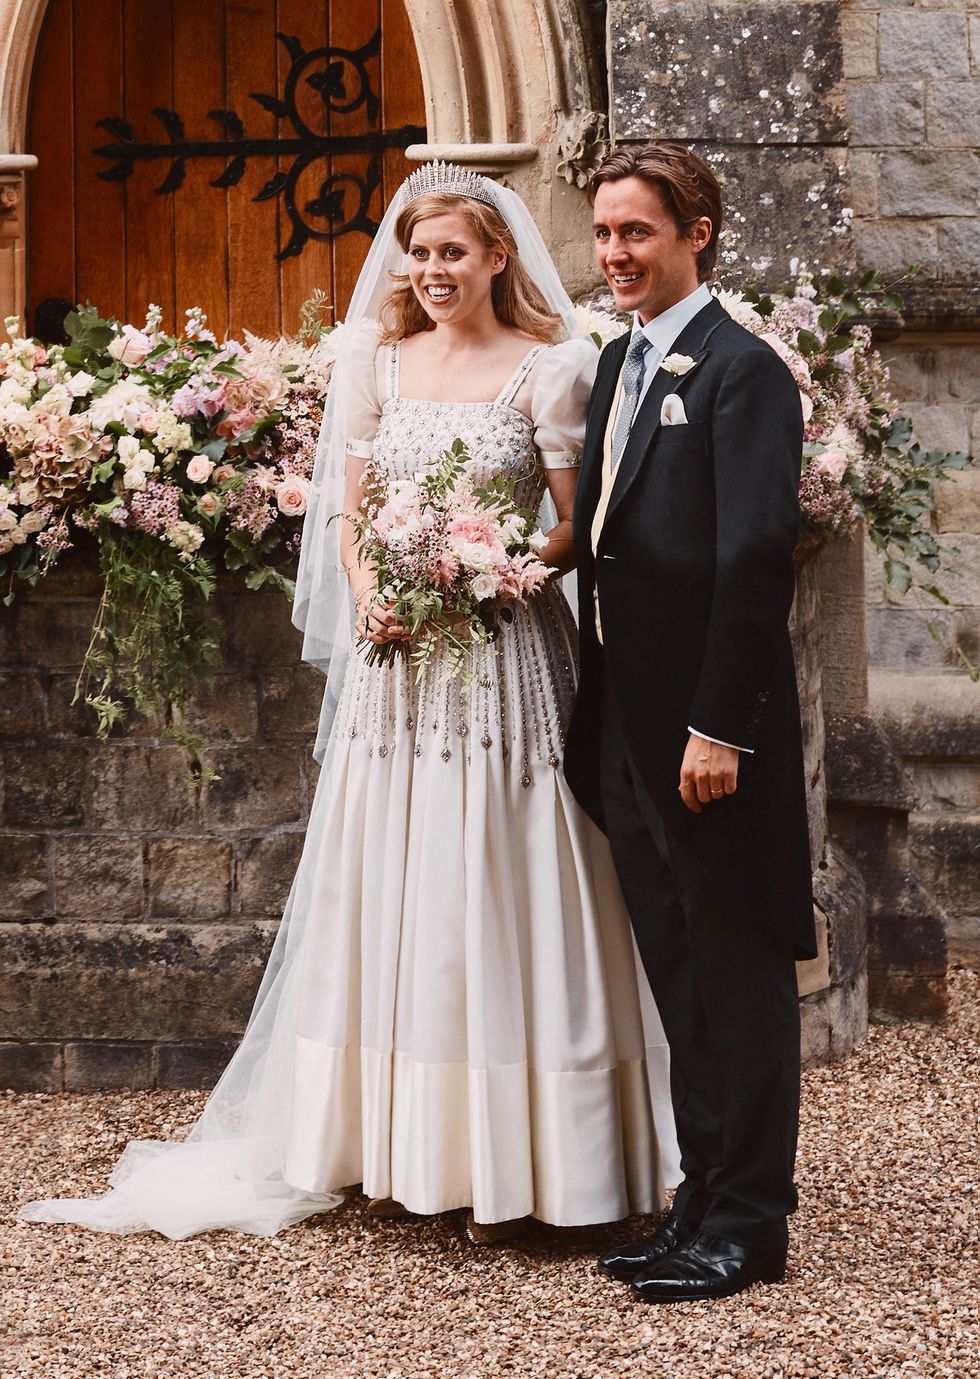 Princess Beatrice's Wedding Dress Photos - Pictures of Beatrice's Vintage  Gown